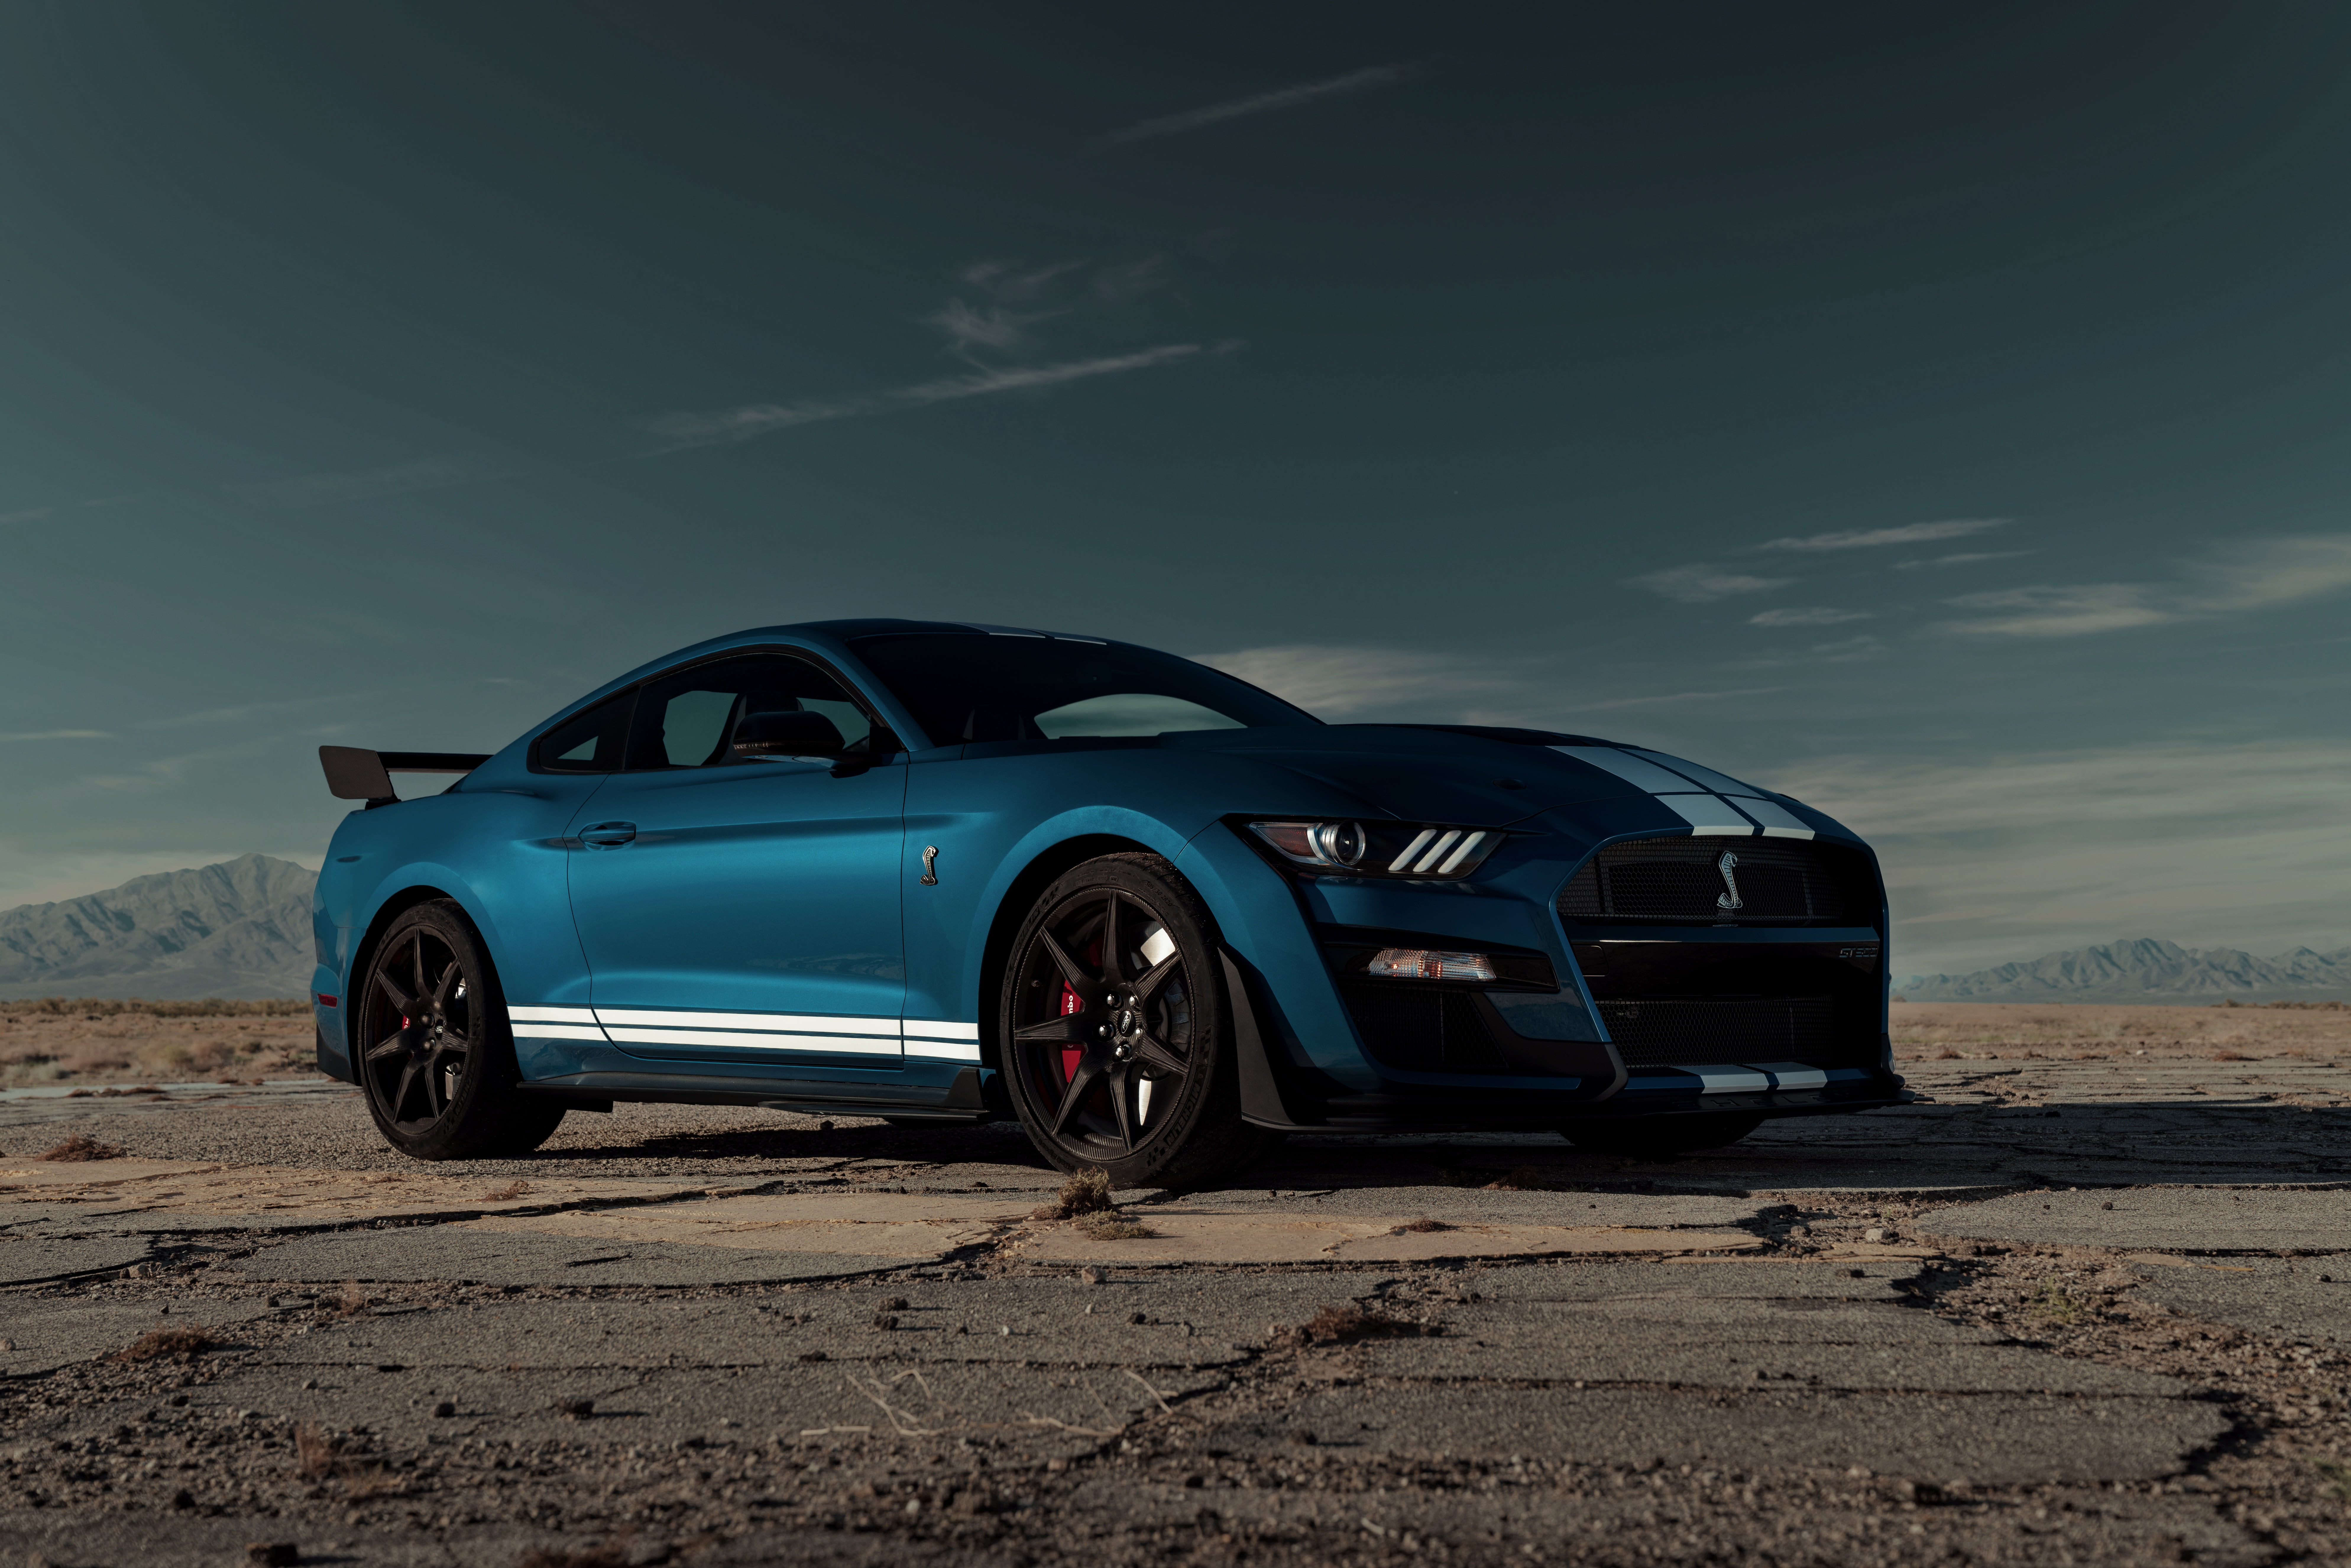 Ford, Ford Mustang Shelby GT500, Blue Car, Muscle Car, Vehicle